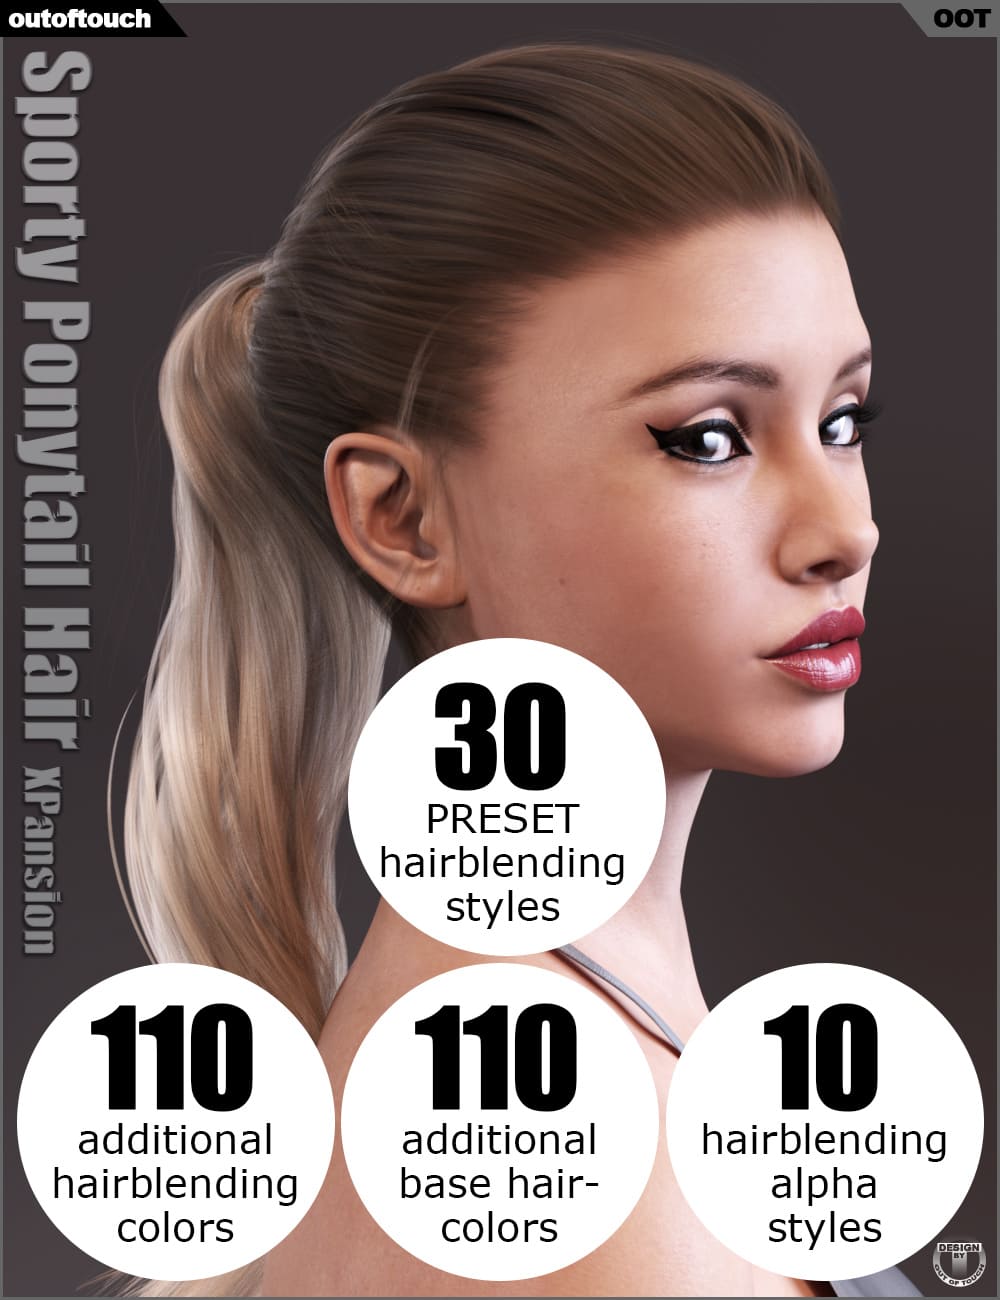 Sporty Ponytail Hair and OOT Hairblending 2.0 Texture XPansion_DAZ3DDL